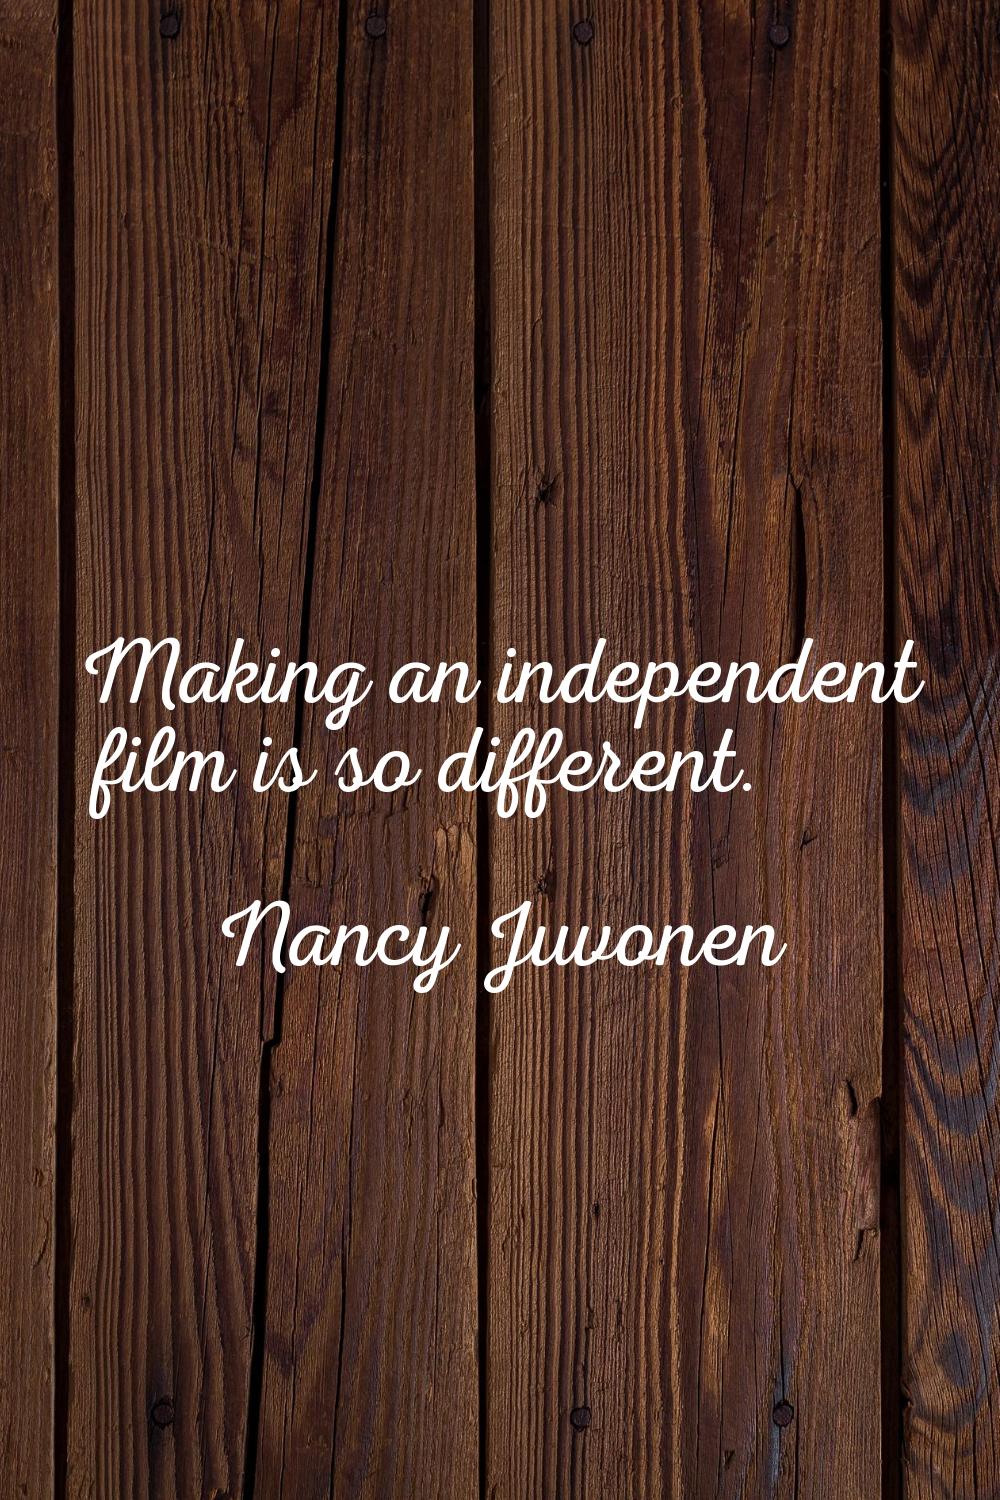 Making an independent film is so different.